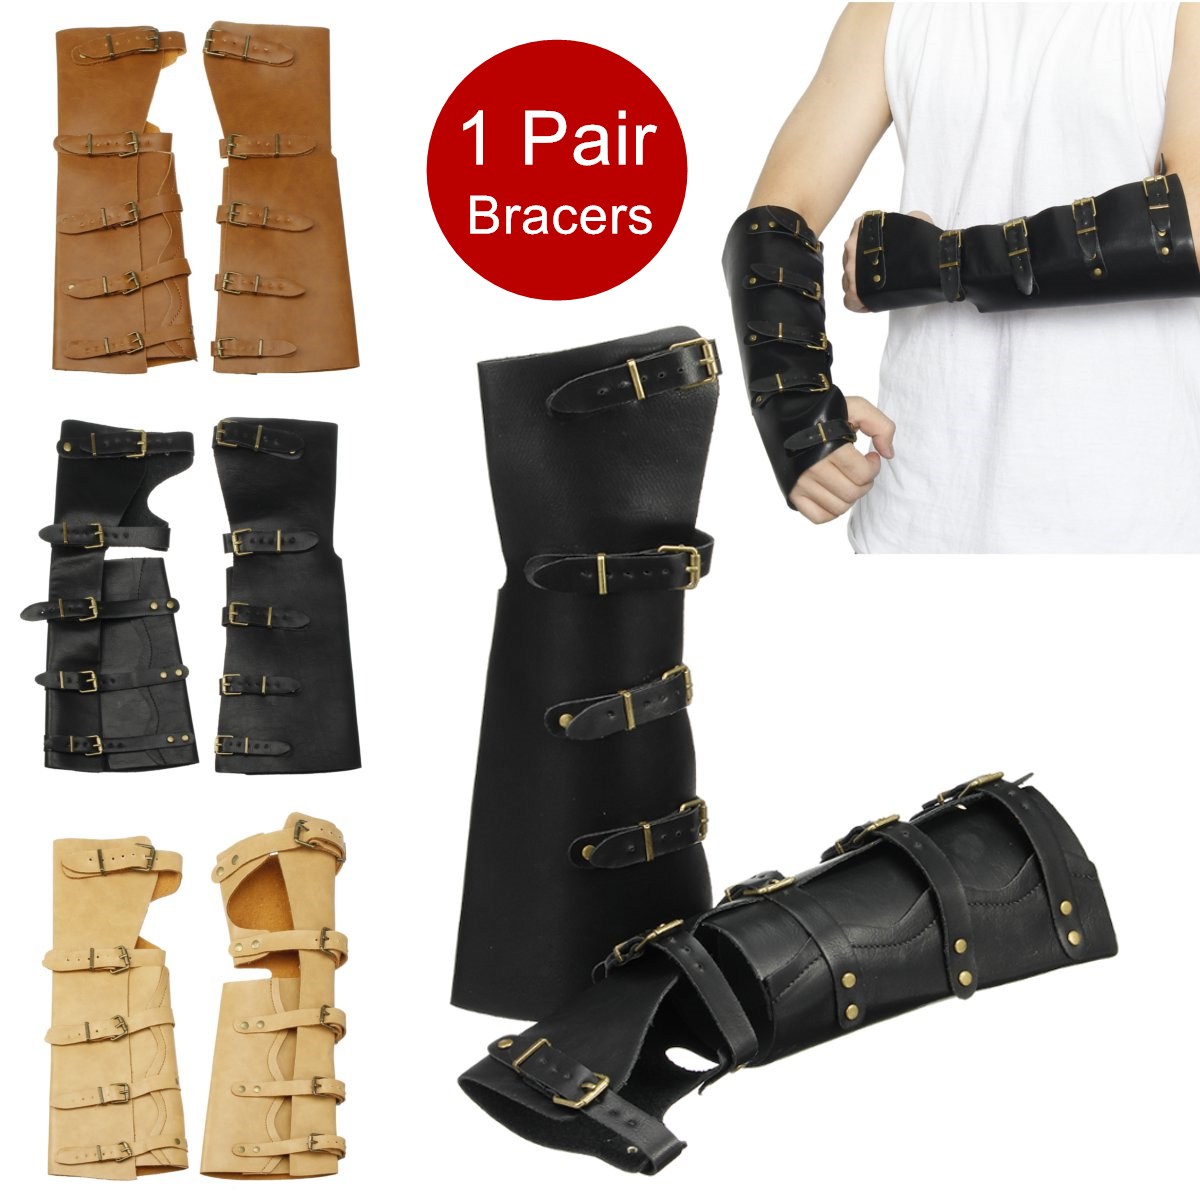 1Pair-Leather-Arm-Support-Outdoor-Hunting-Tactical-Hand-Bracers-1626449-1